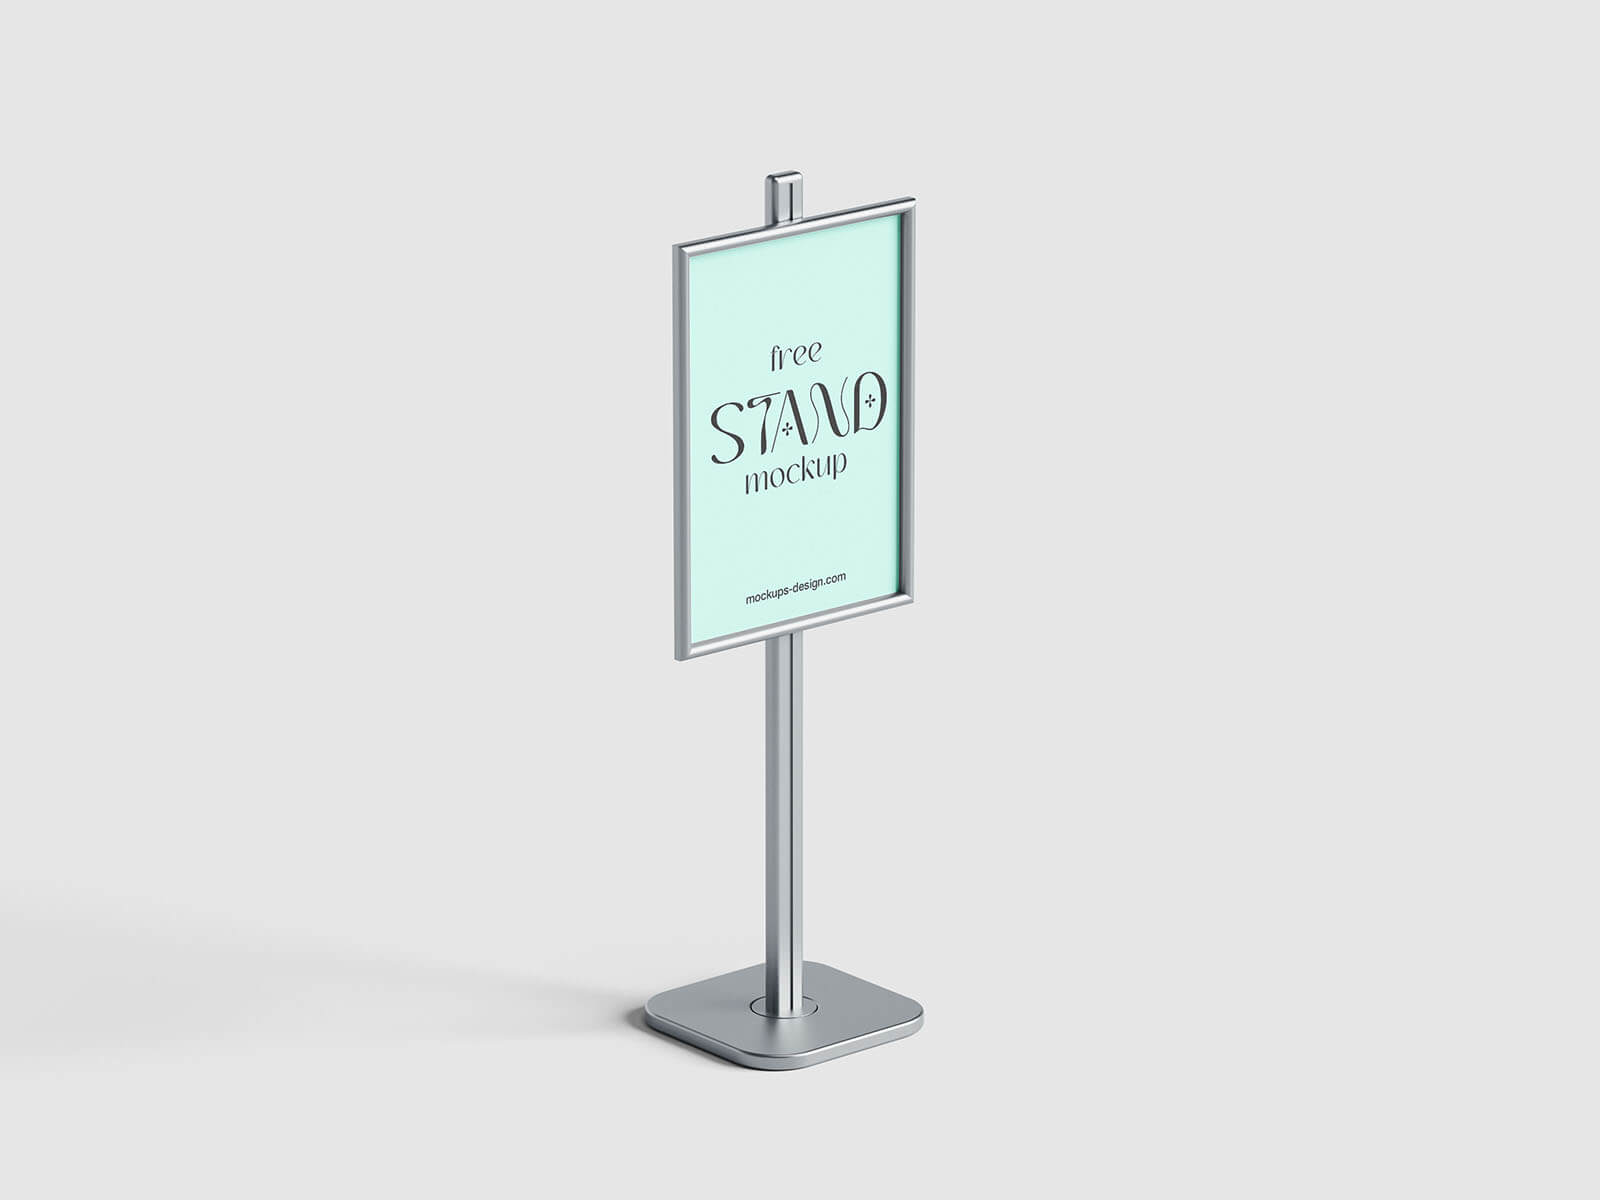 3 Free Information Poster Stand Mockup PSD Files